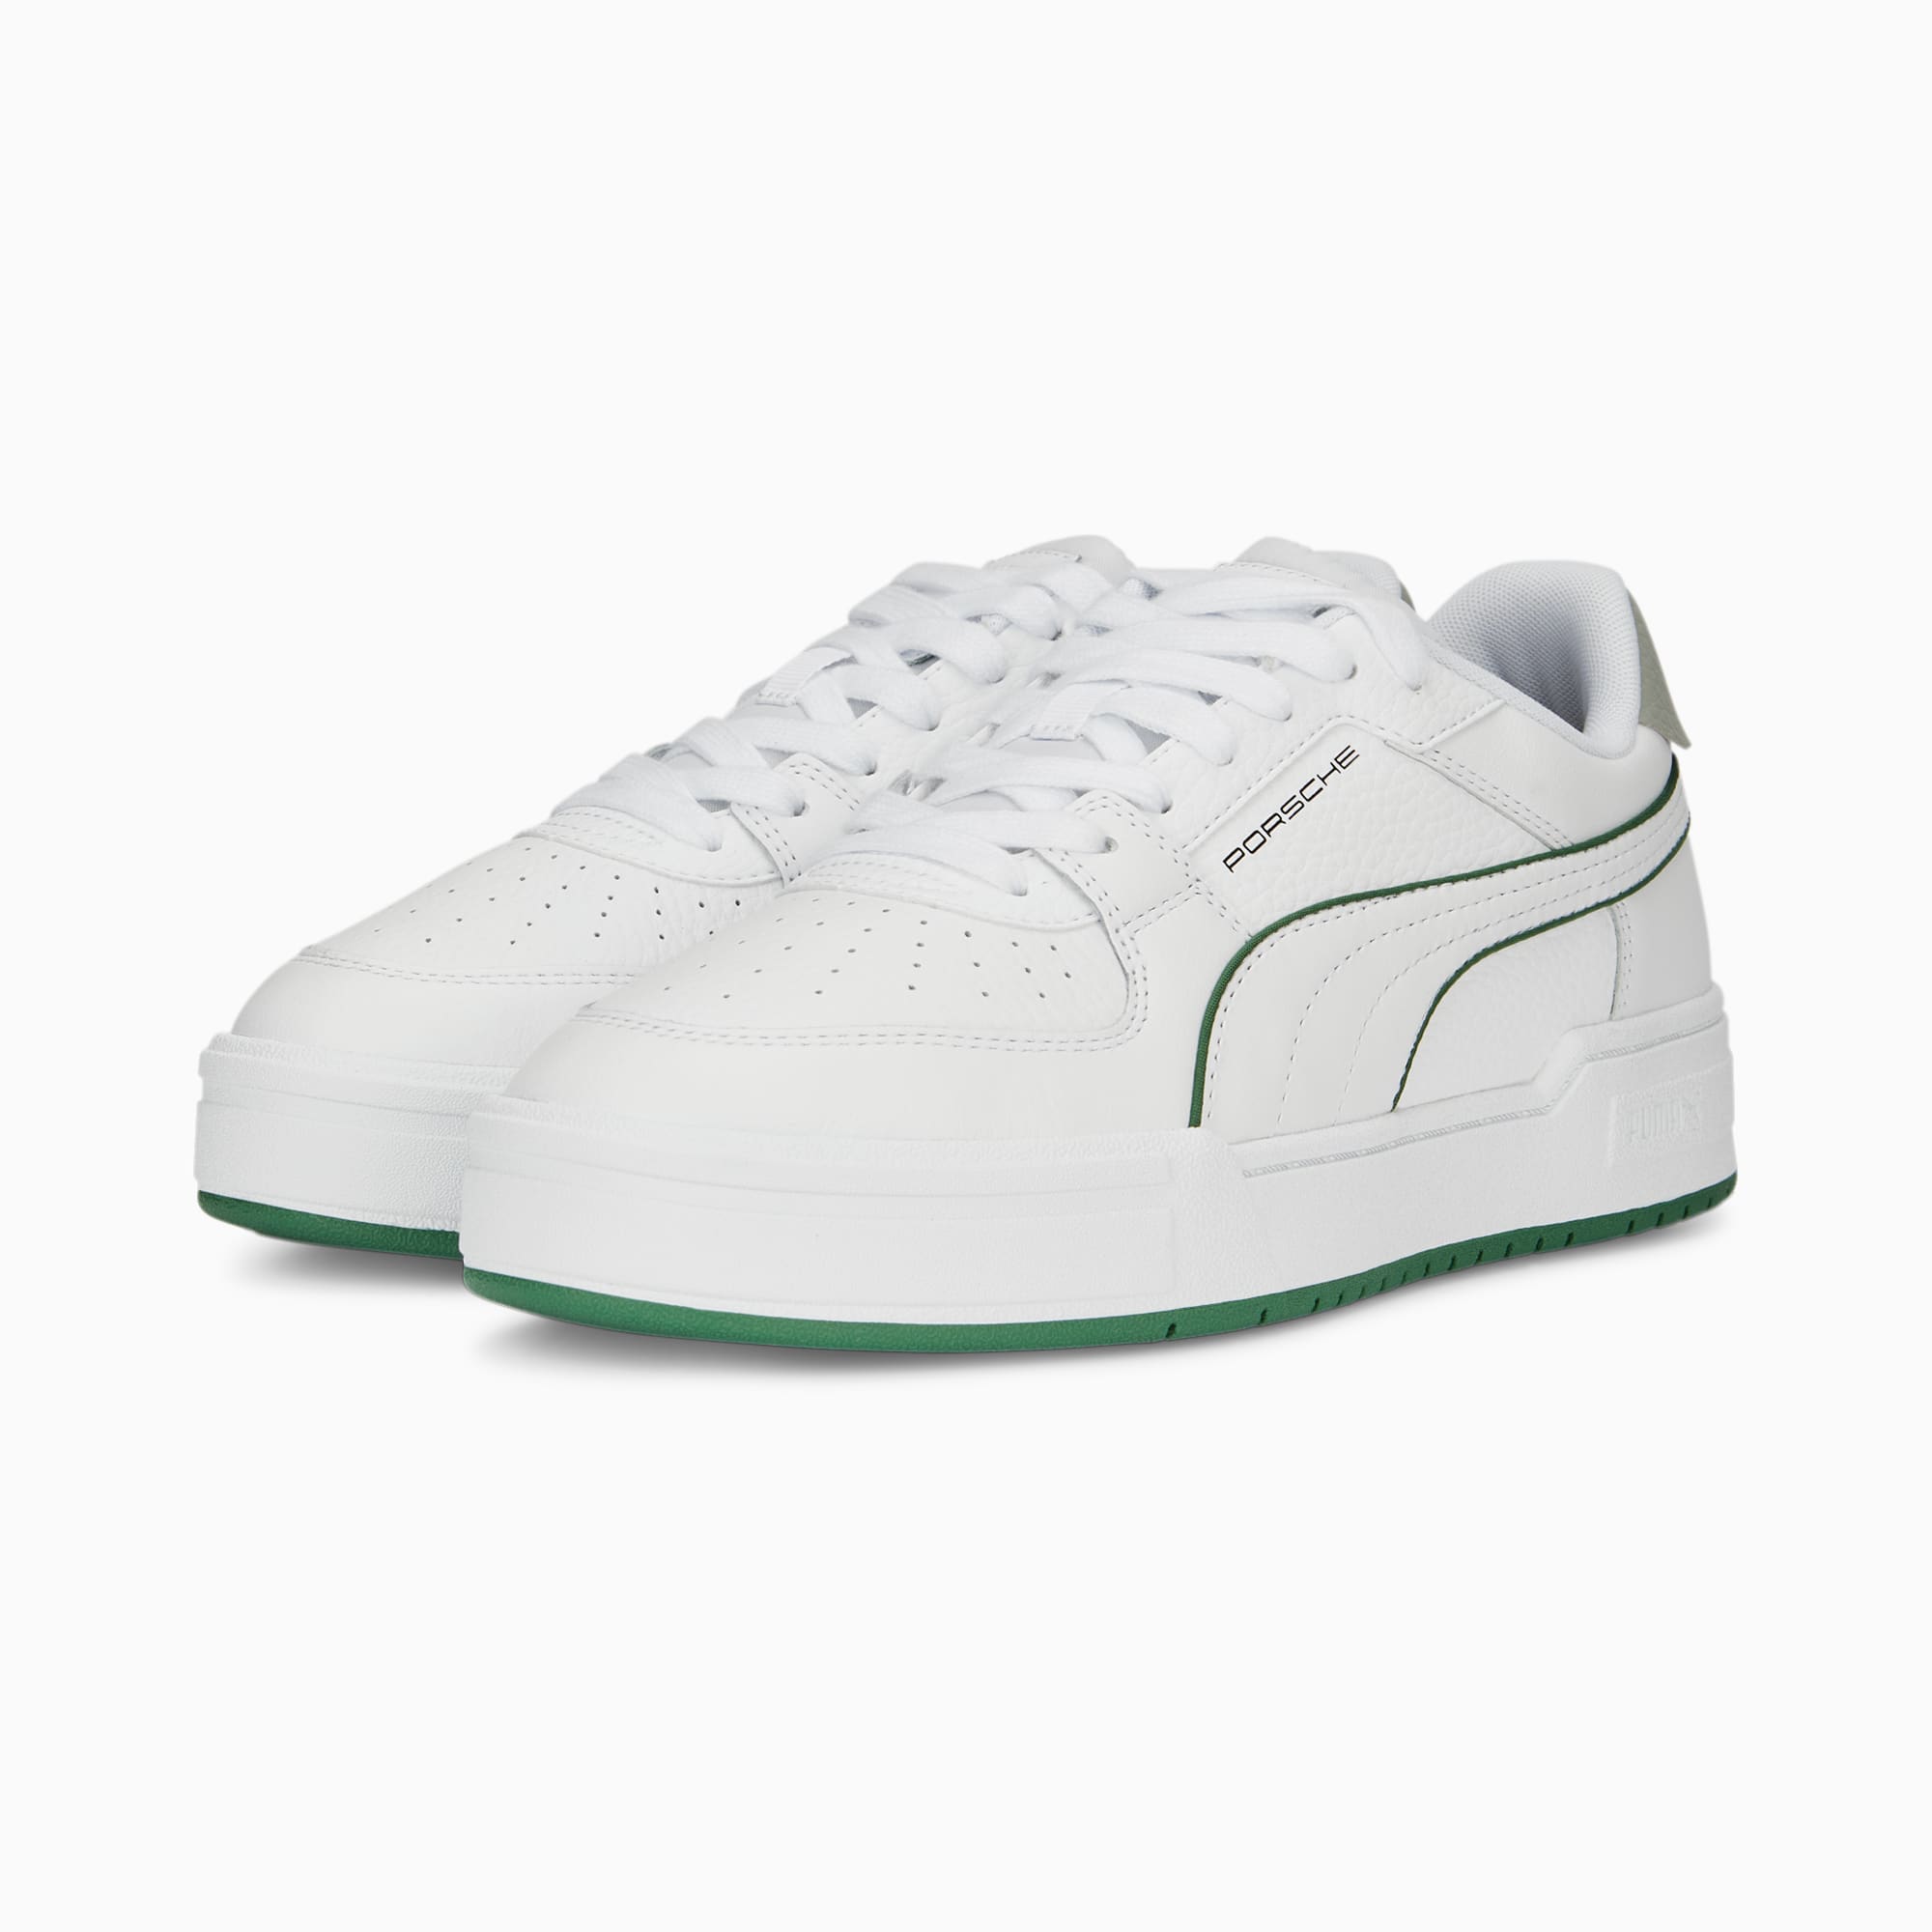 Buy Porsche Legacy CA Pro Lux Sneakers Men's Footwear from Puma. Find Puma  fashion & more at